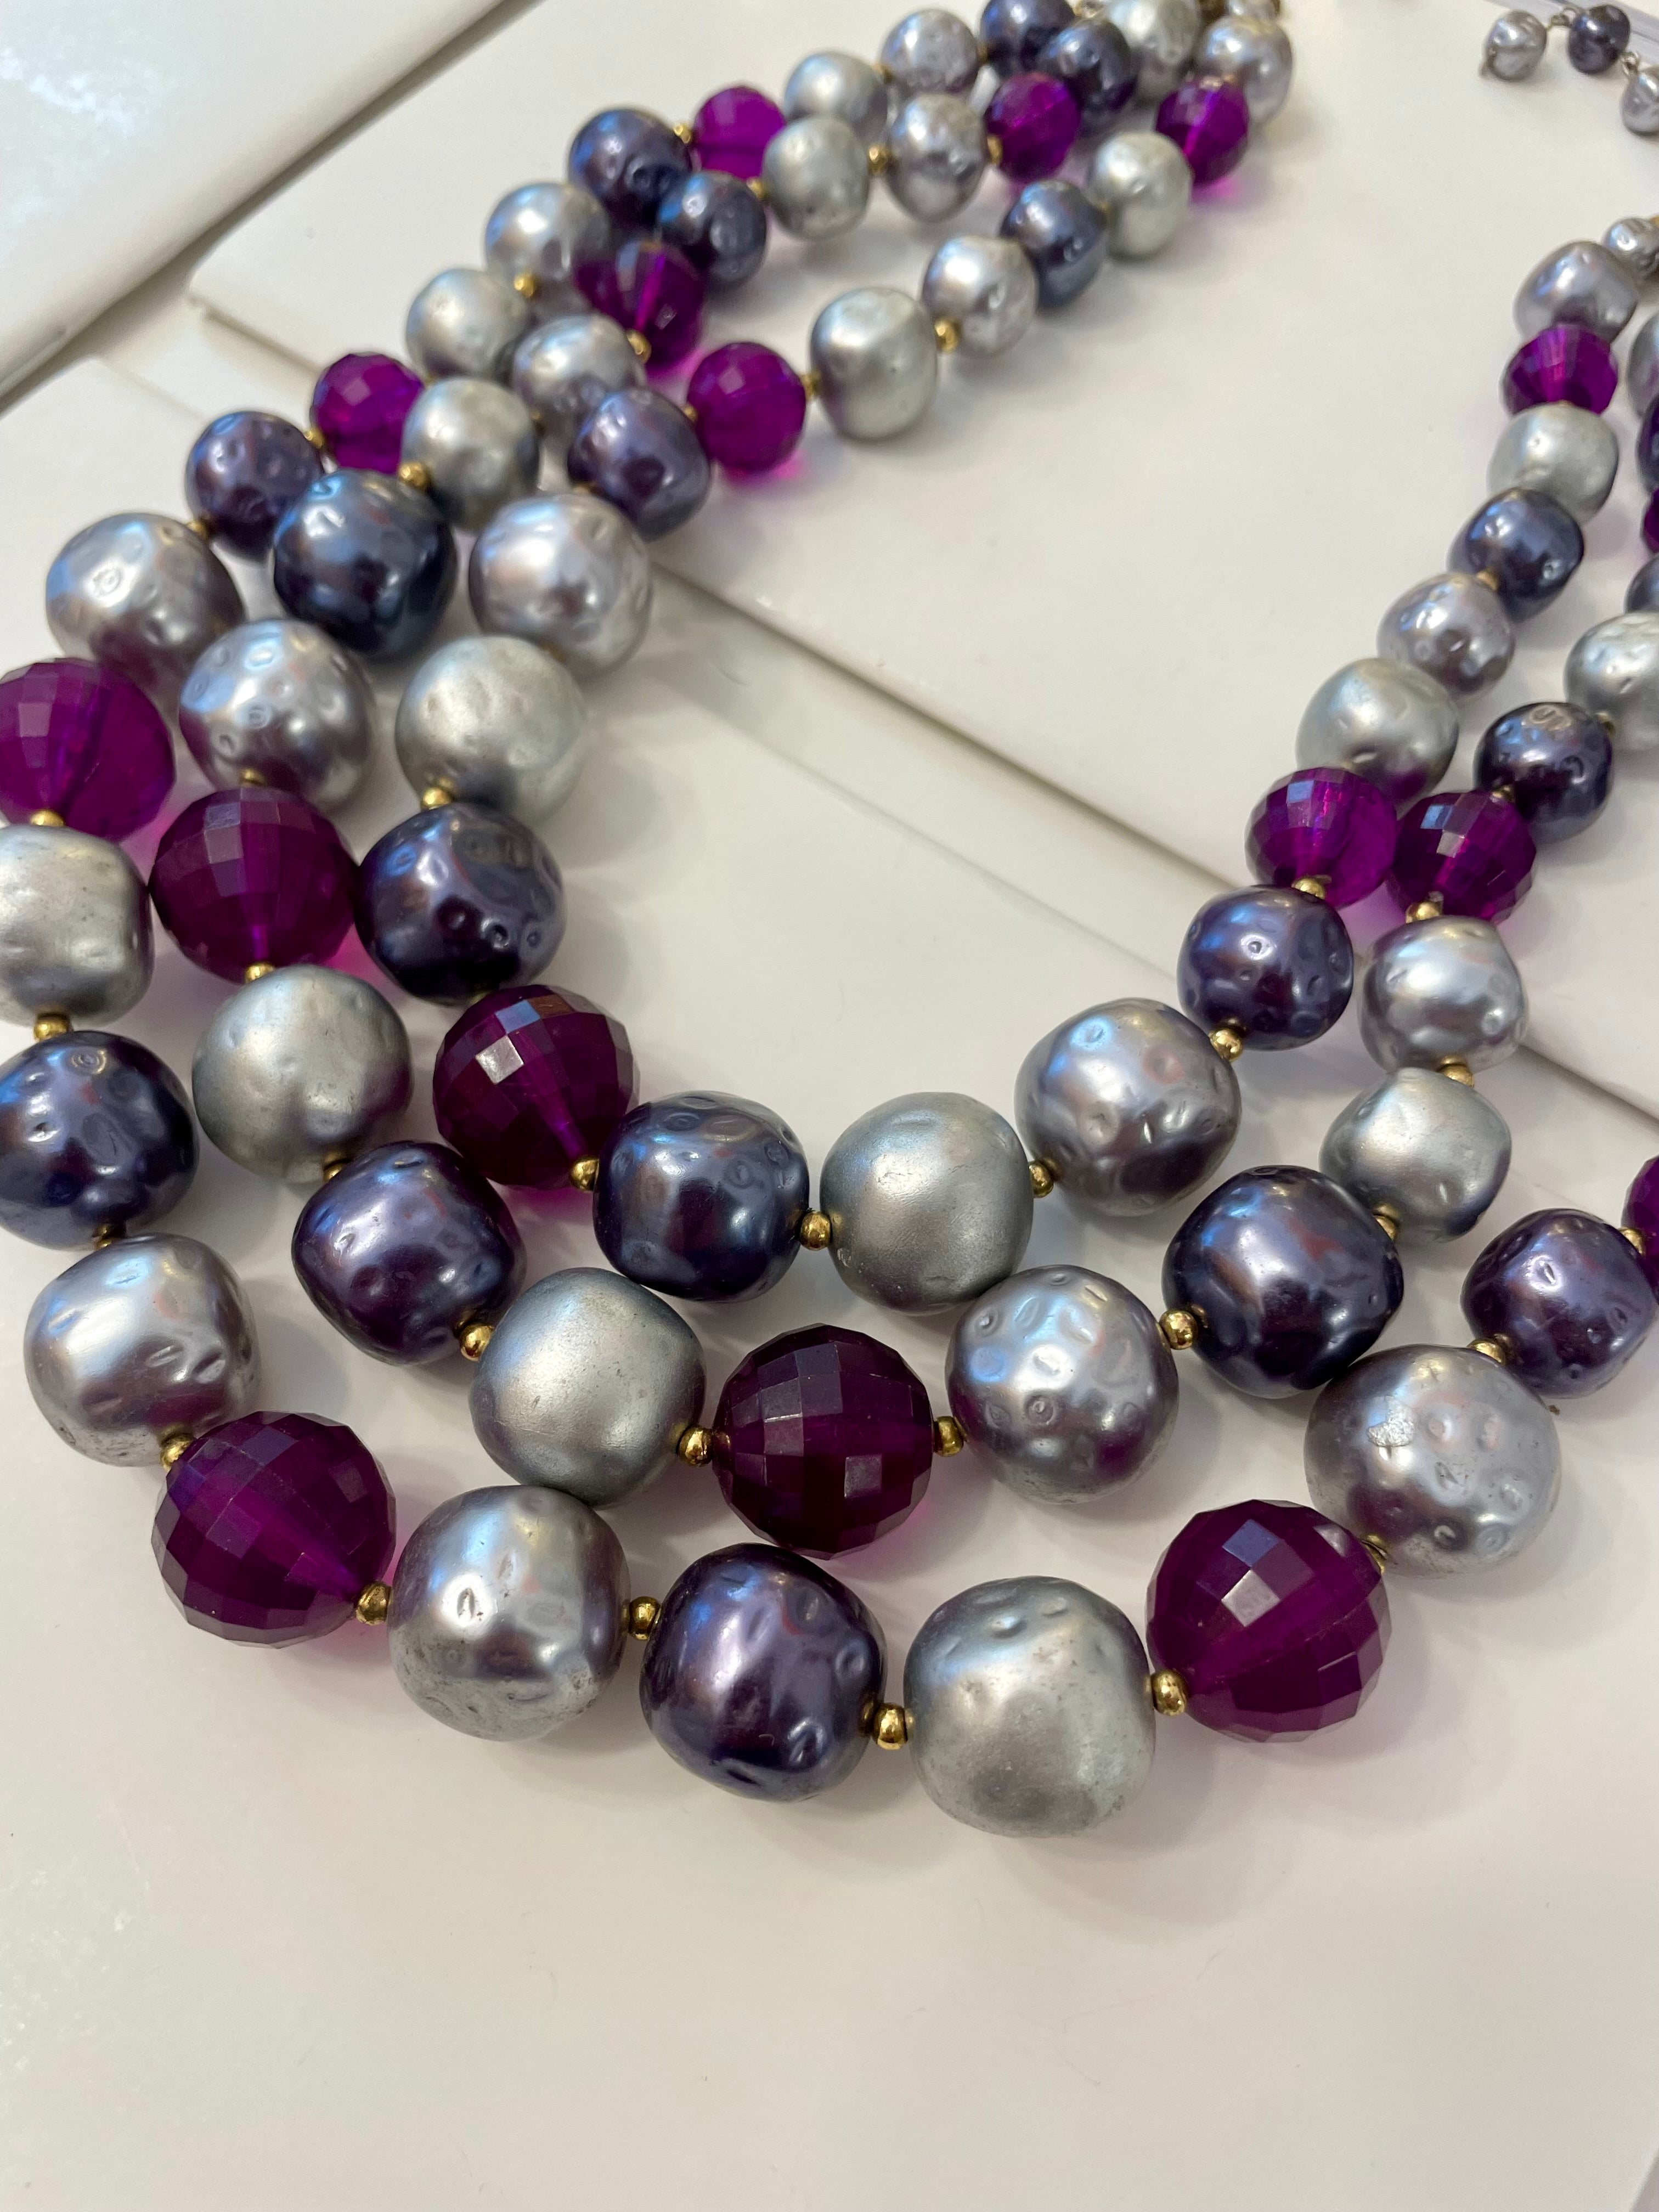 Vintage divine amethyst resin and gray pearl beaded necklace.. So chic